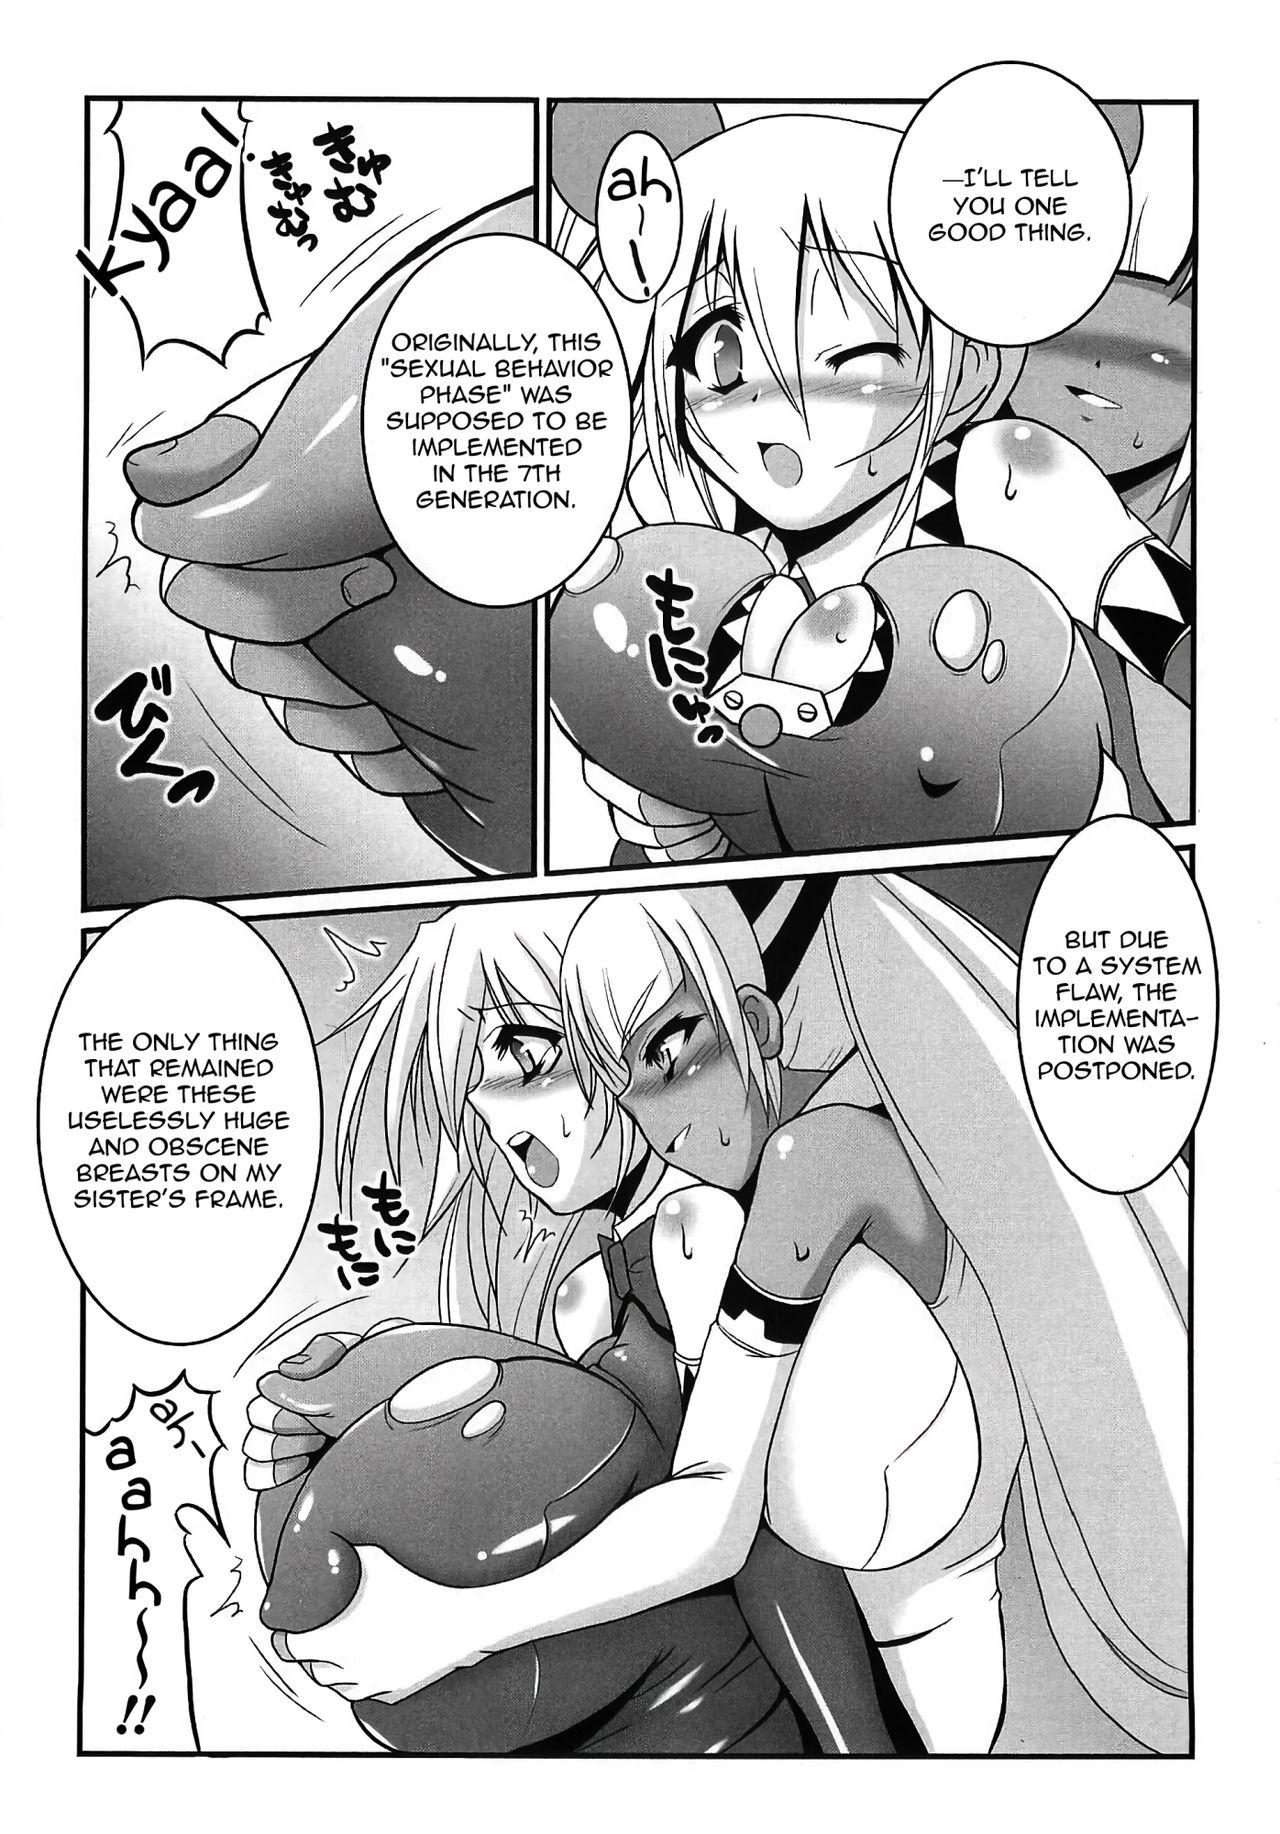 Best Milky Angel Nahato x Ahato - Original Athletic - Page 5